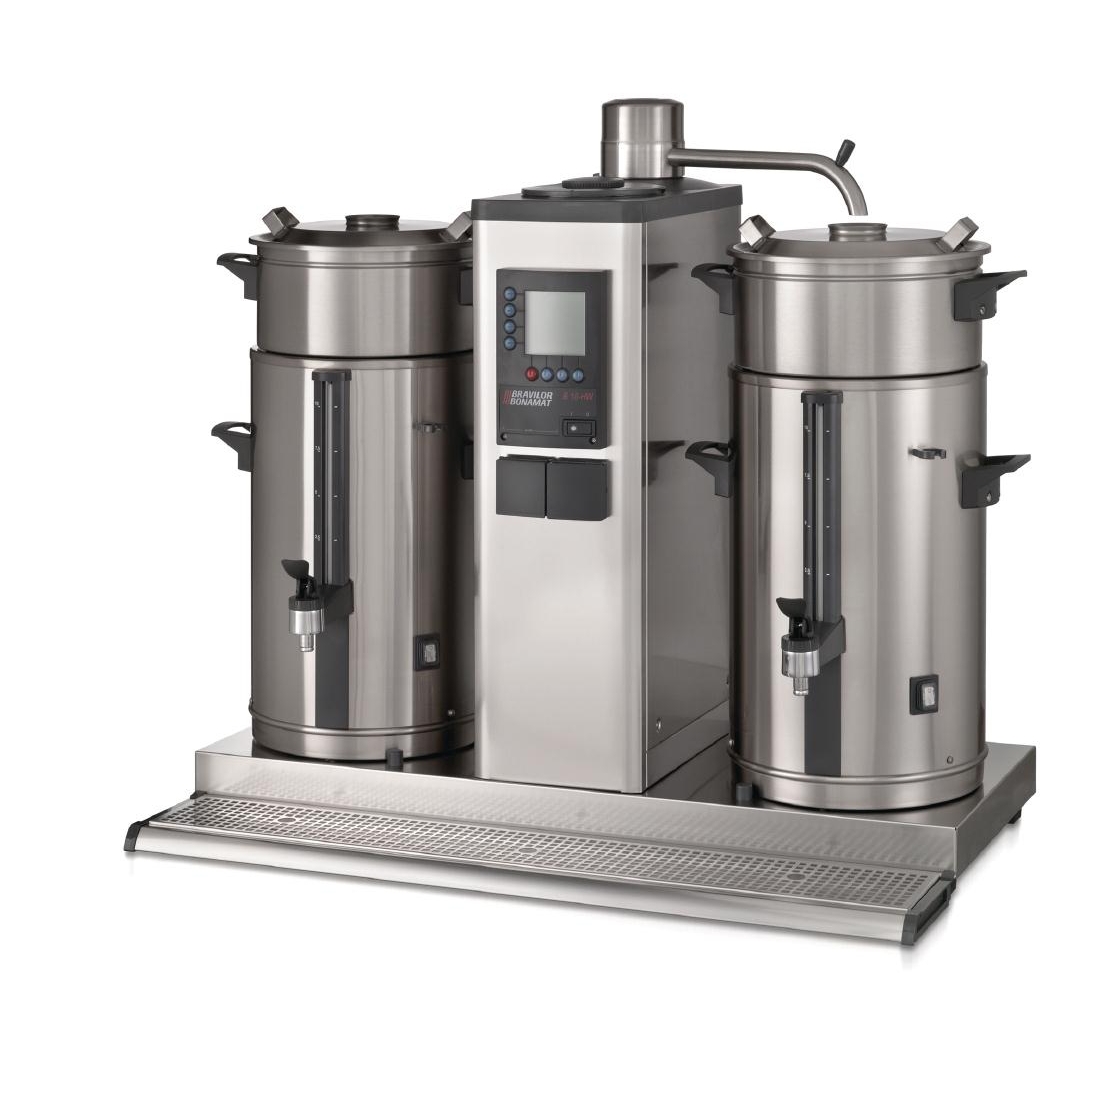 Bravilor B10 Bulk Coffee Brewer with 2x10Ltr Coffee Urns Three Phase